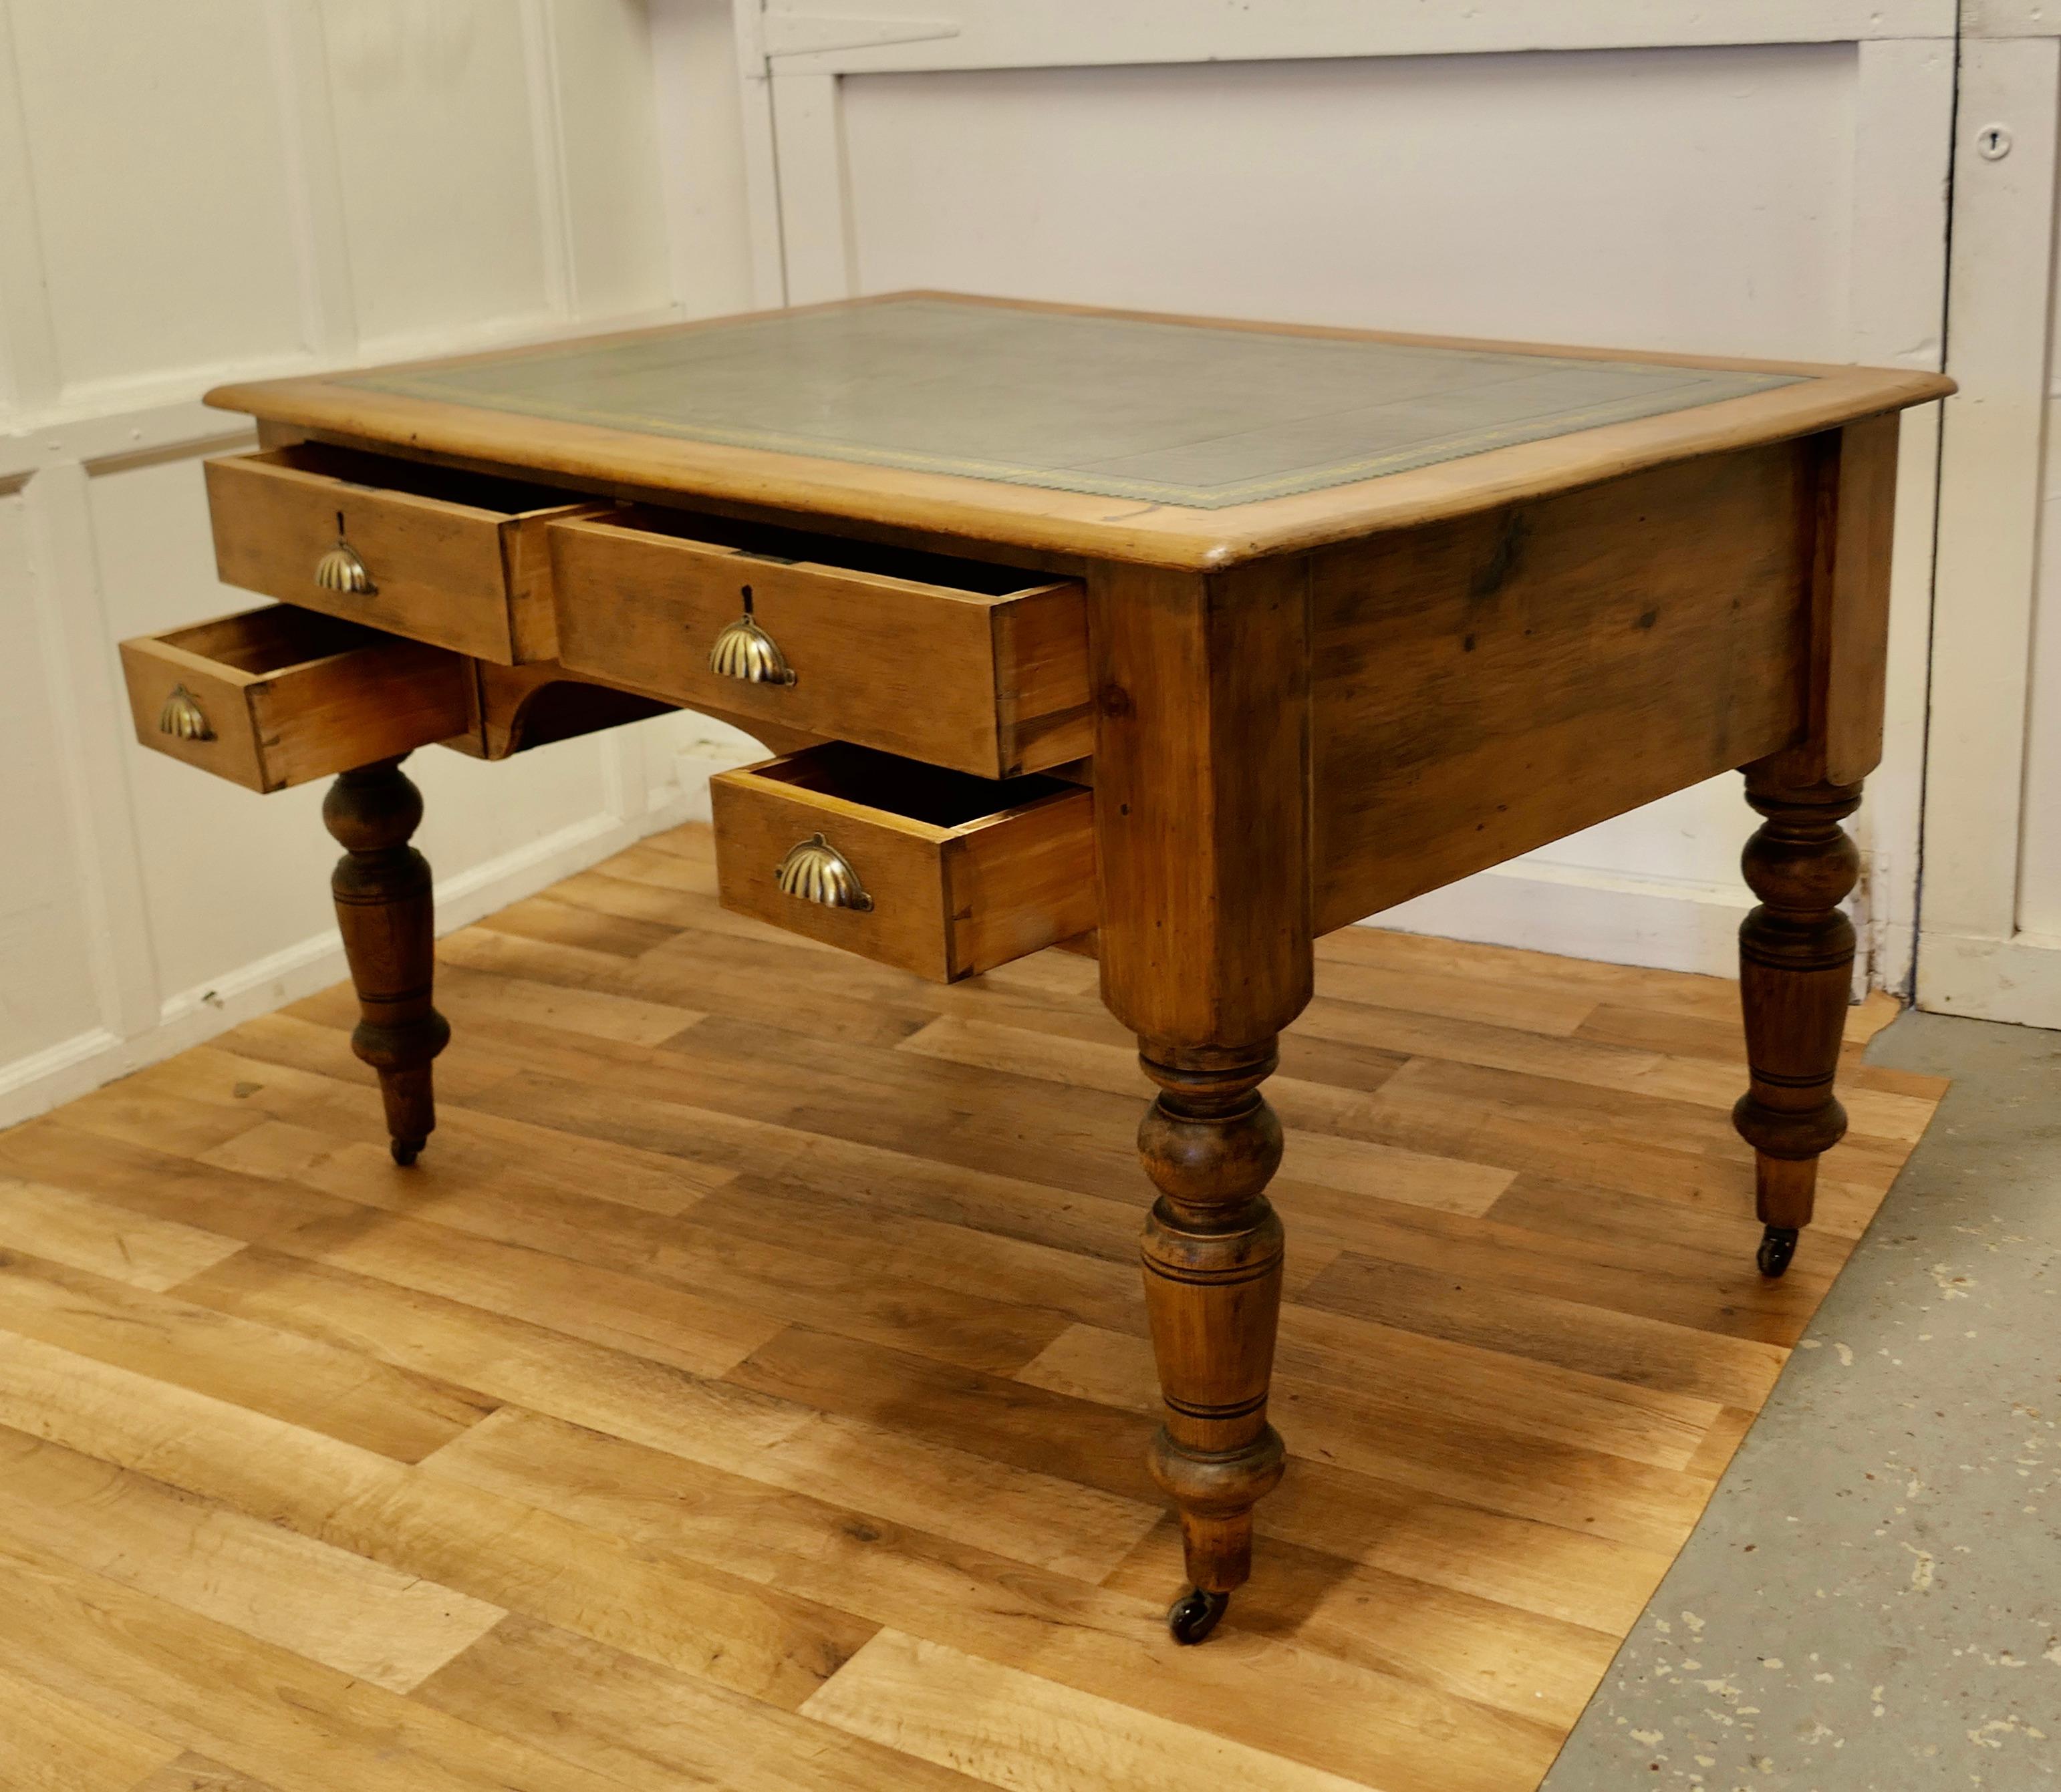 19th Century Antique Pine Leather Top Partners Desk, Library Table For Sale